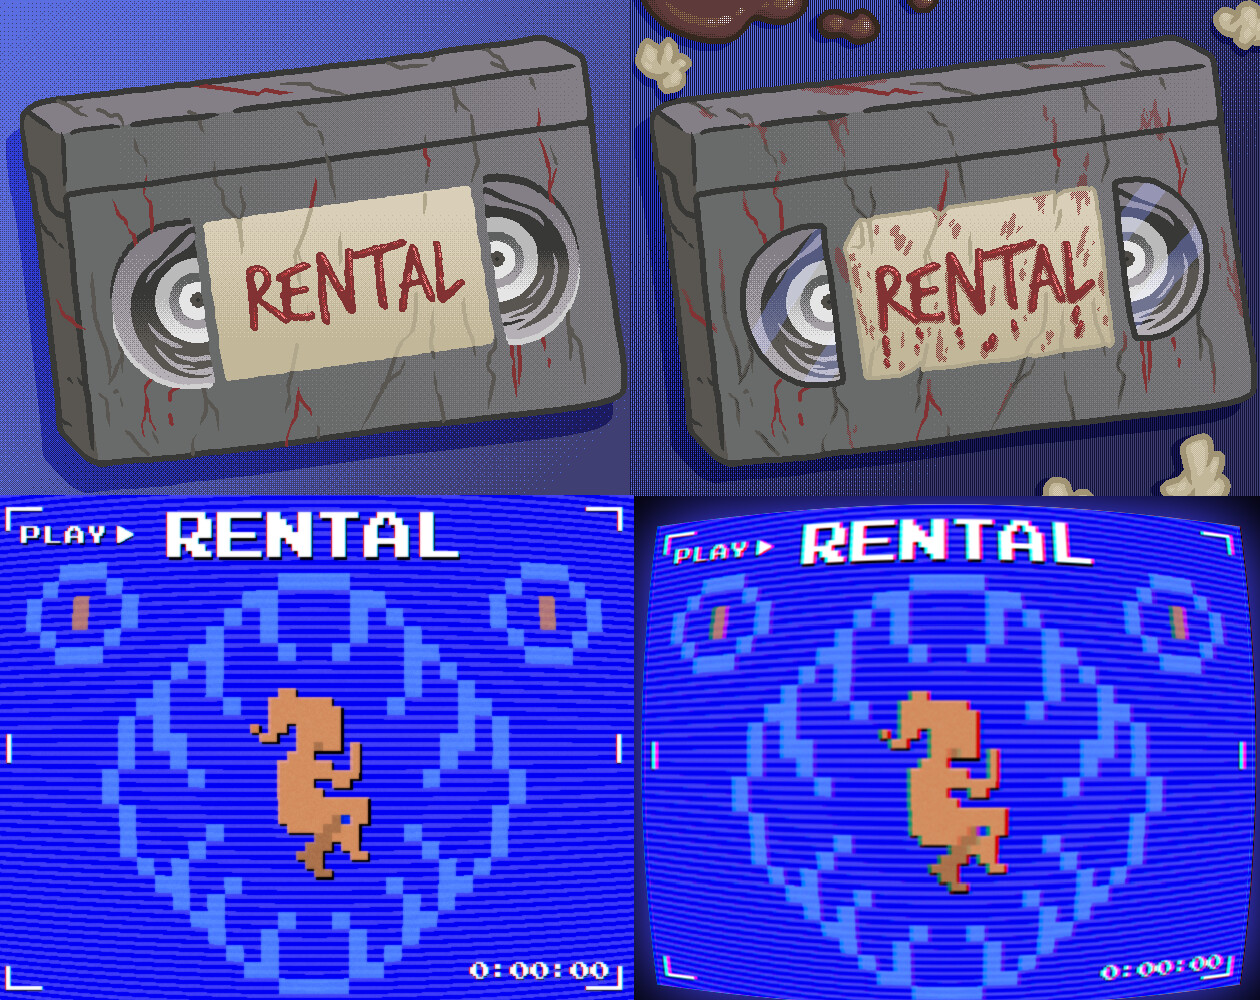 Title thumbnail variations. My first version, top left, felt a bit too bland, without communicating the horror or setting of the game enough, leading to the right. The bottom thumbnails referenced VHS screens, as well as the game's retro pixel art style. 